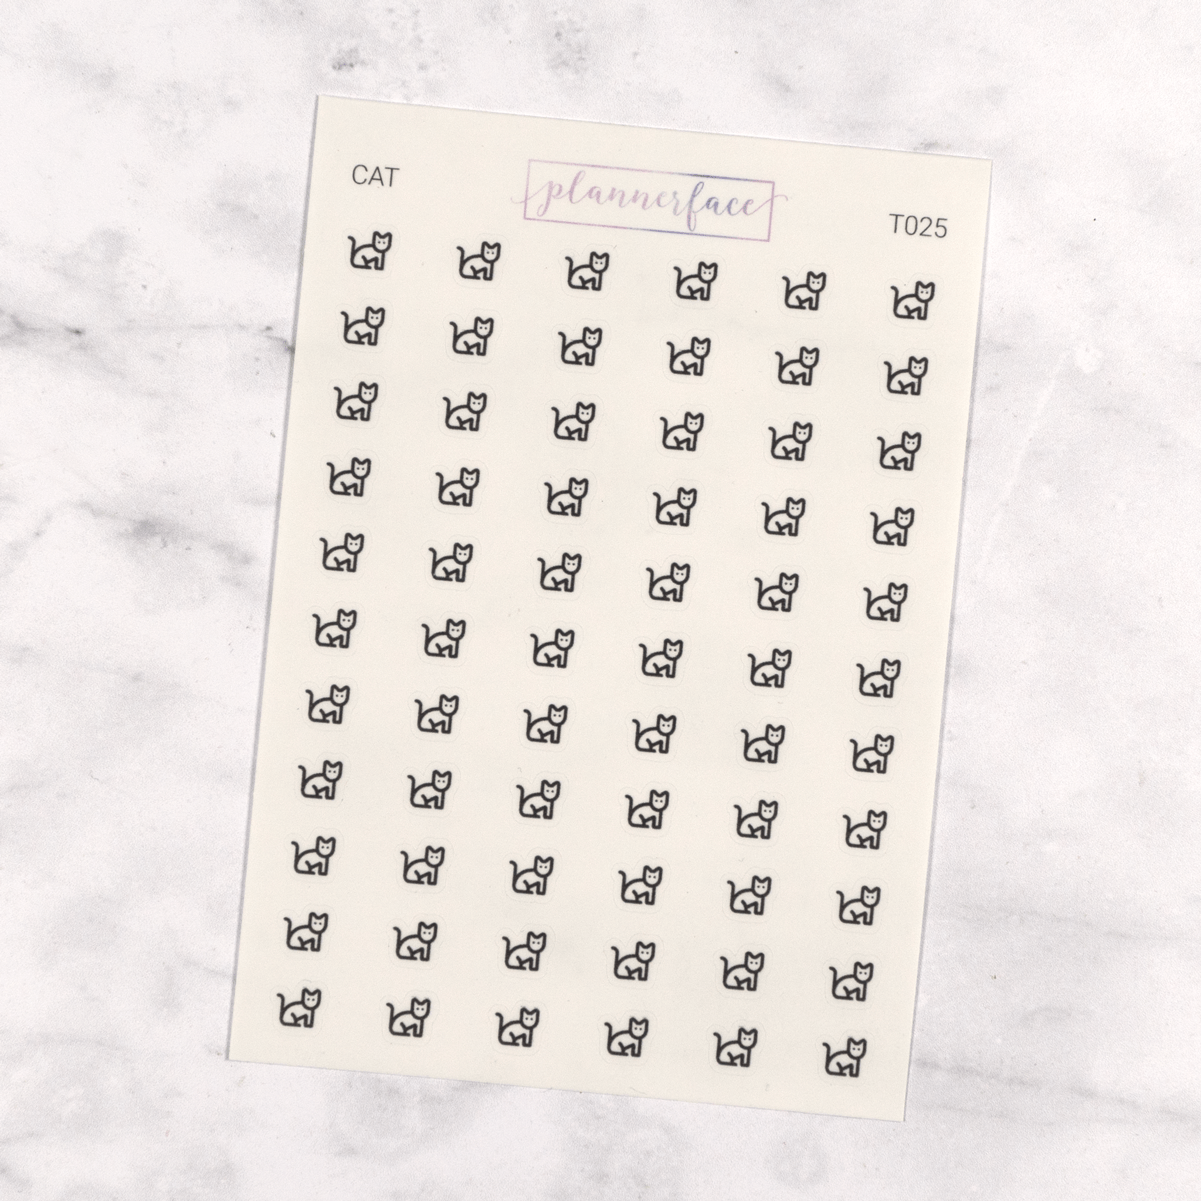 Cat Transparent Icon Stickers by Plannerface